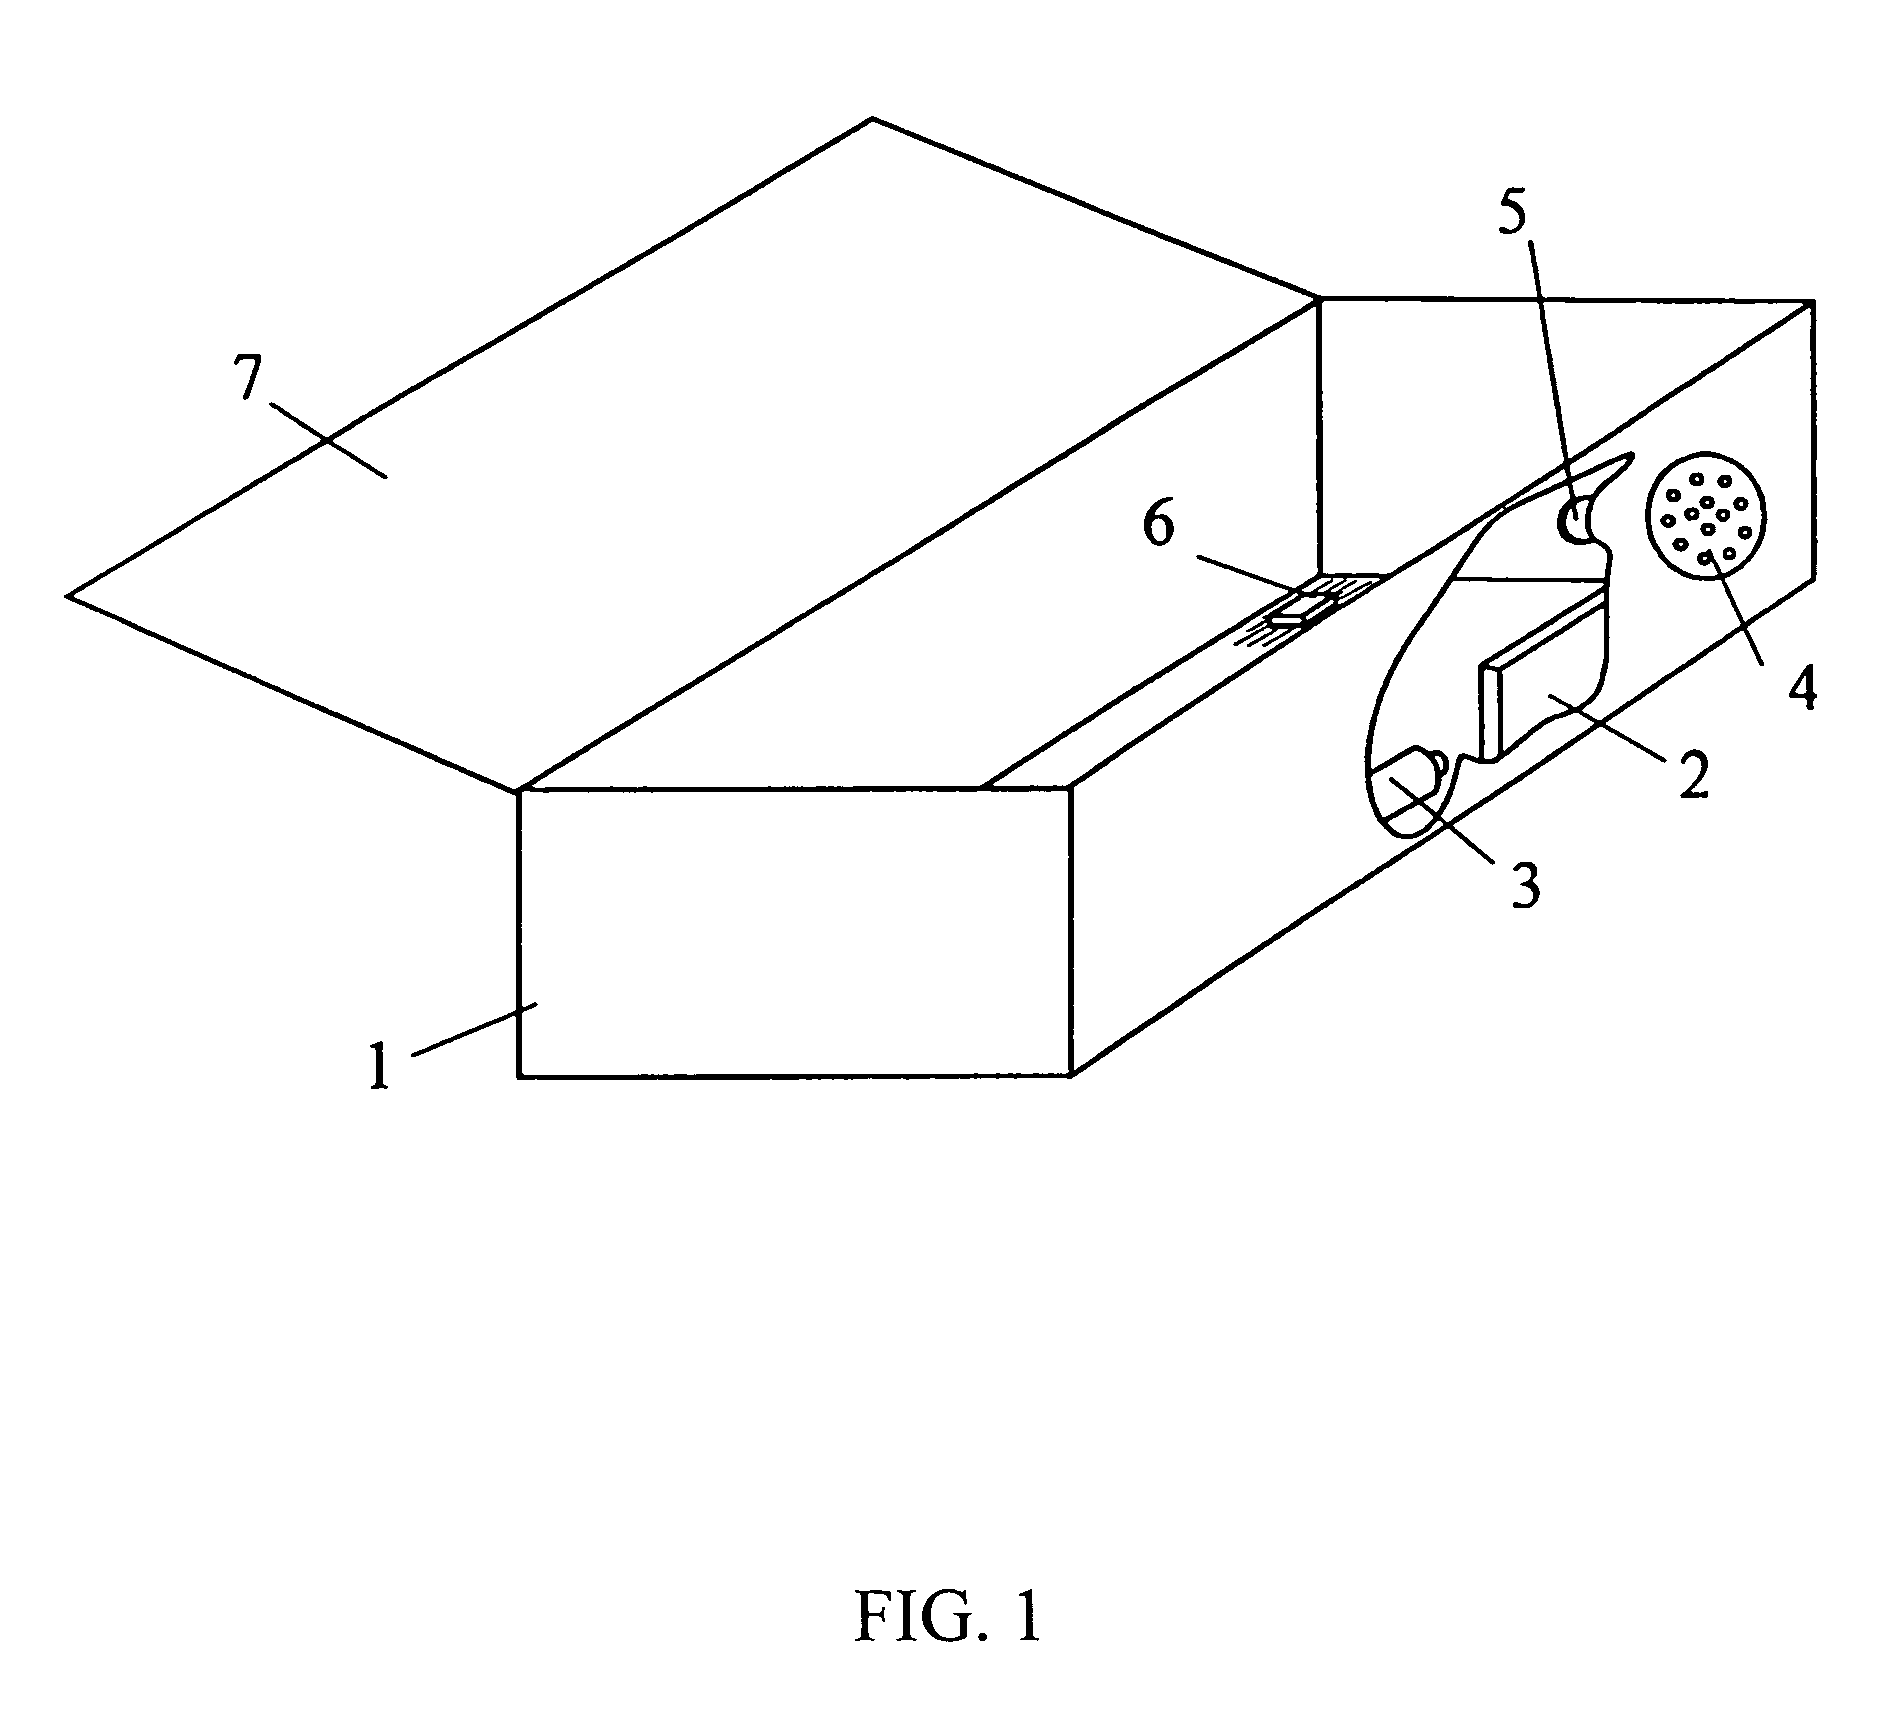 Package provided with a sound-reproducing device